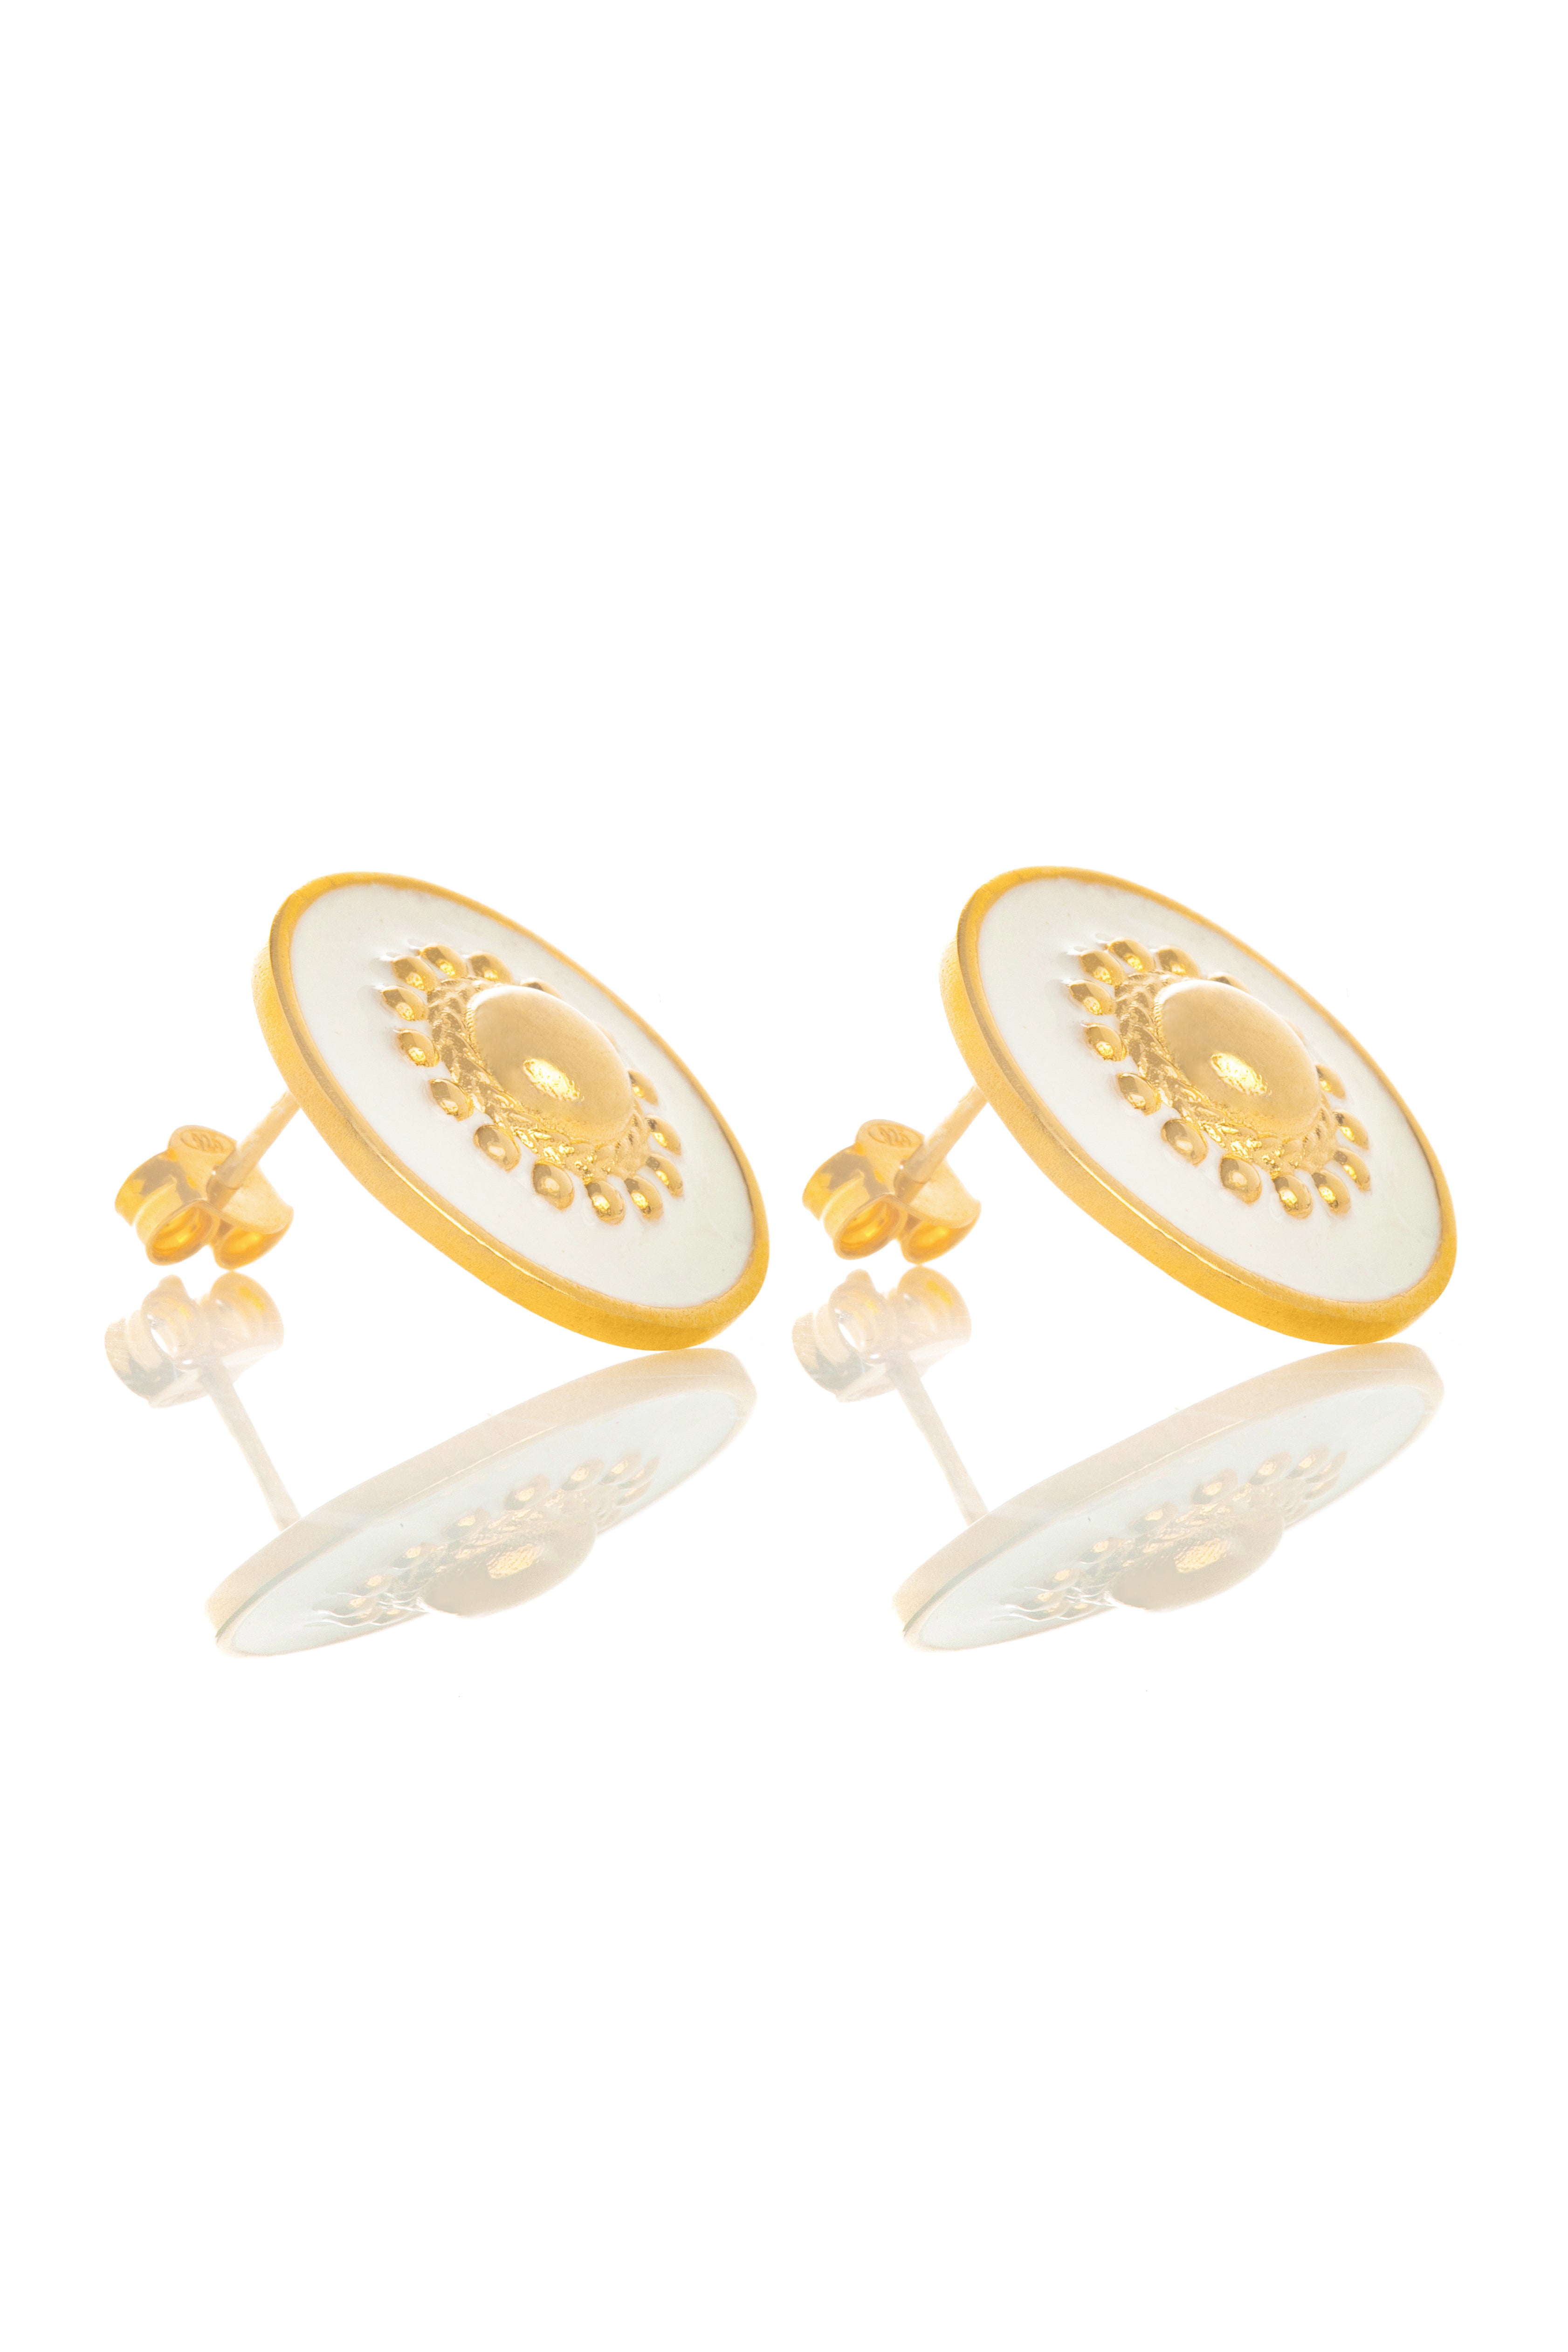 Thaleia stud earrings silver 925° by Pearl Martini